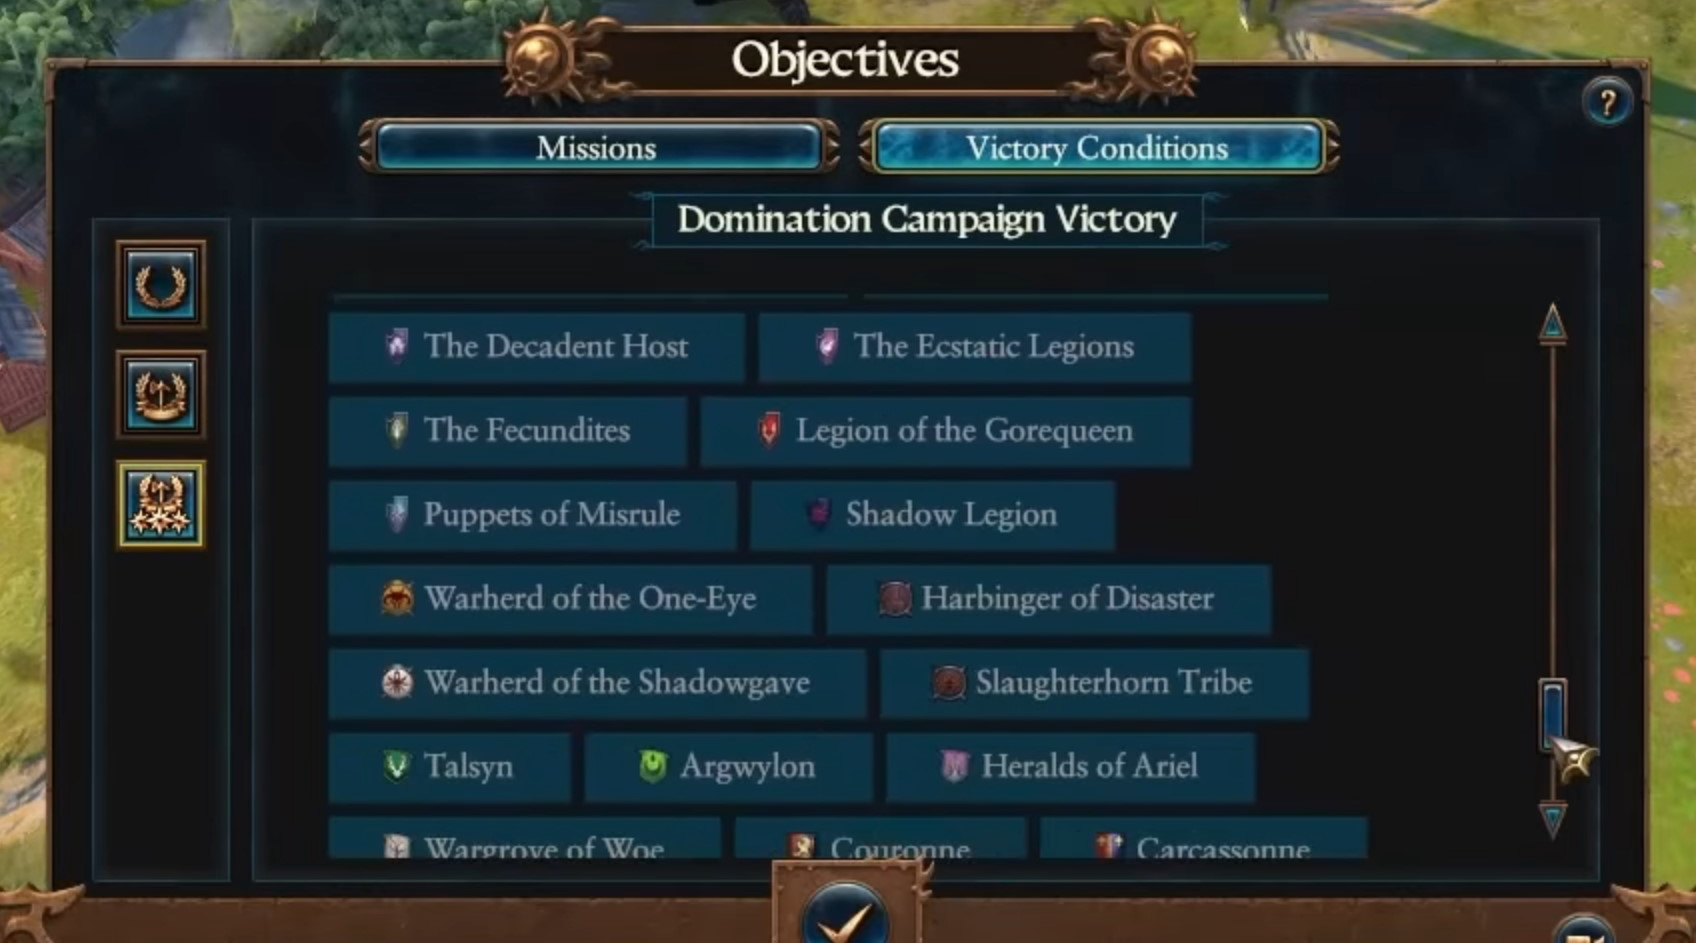 Total War: Warhammer 3 video accidentally leaks 4 DLC factions